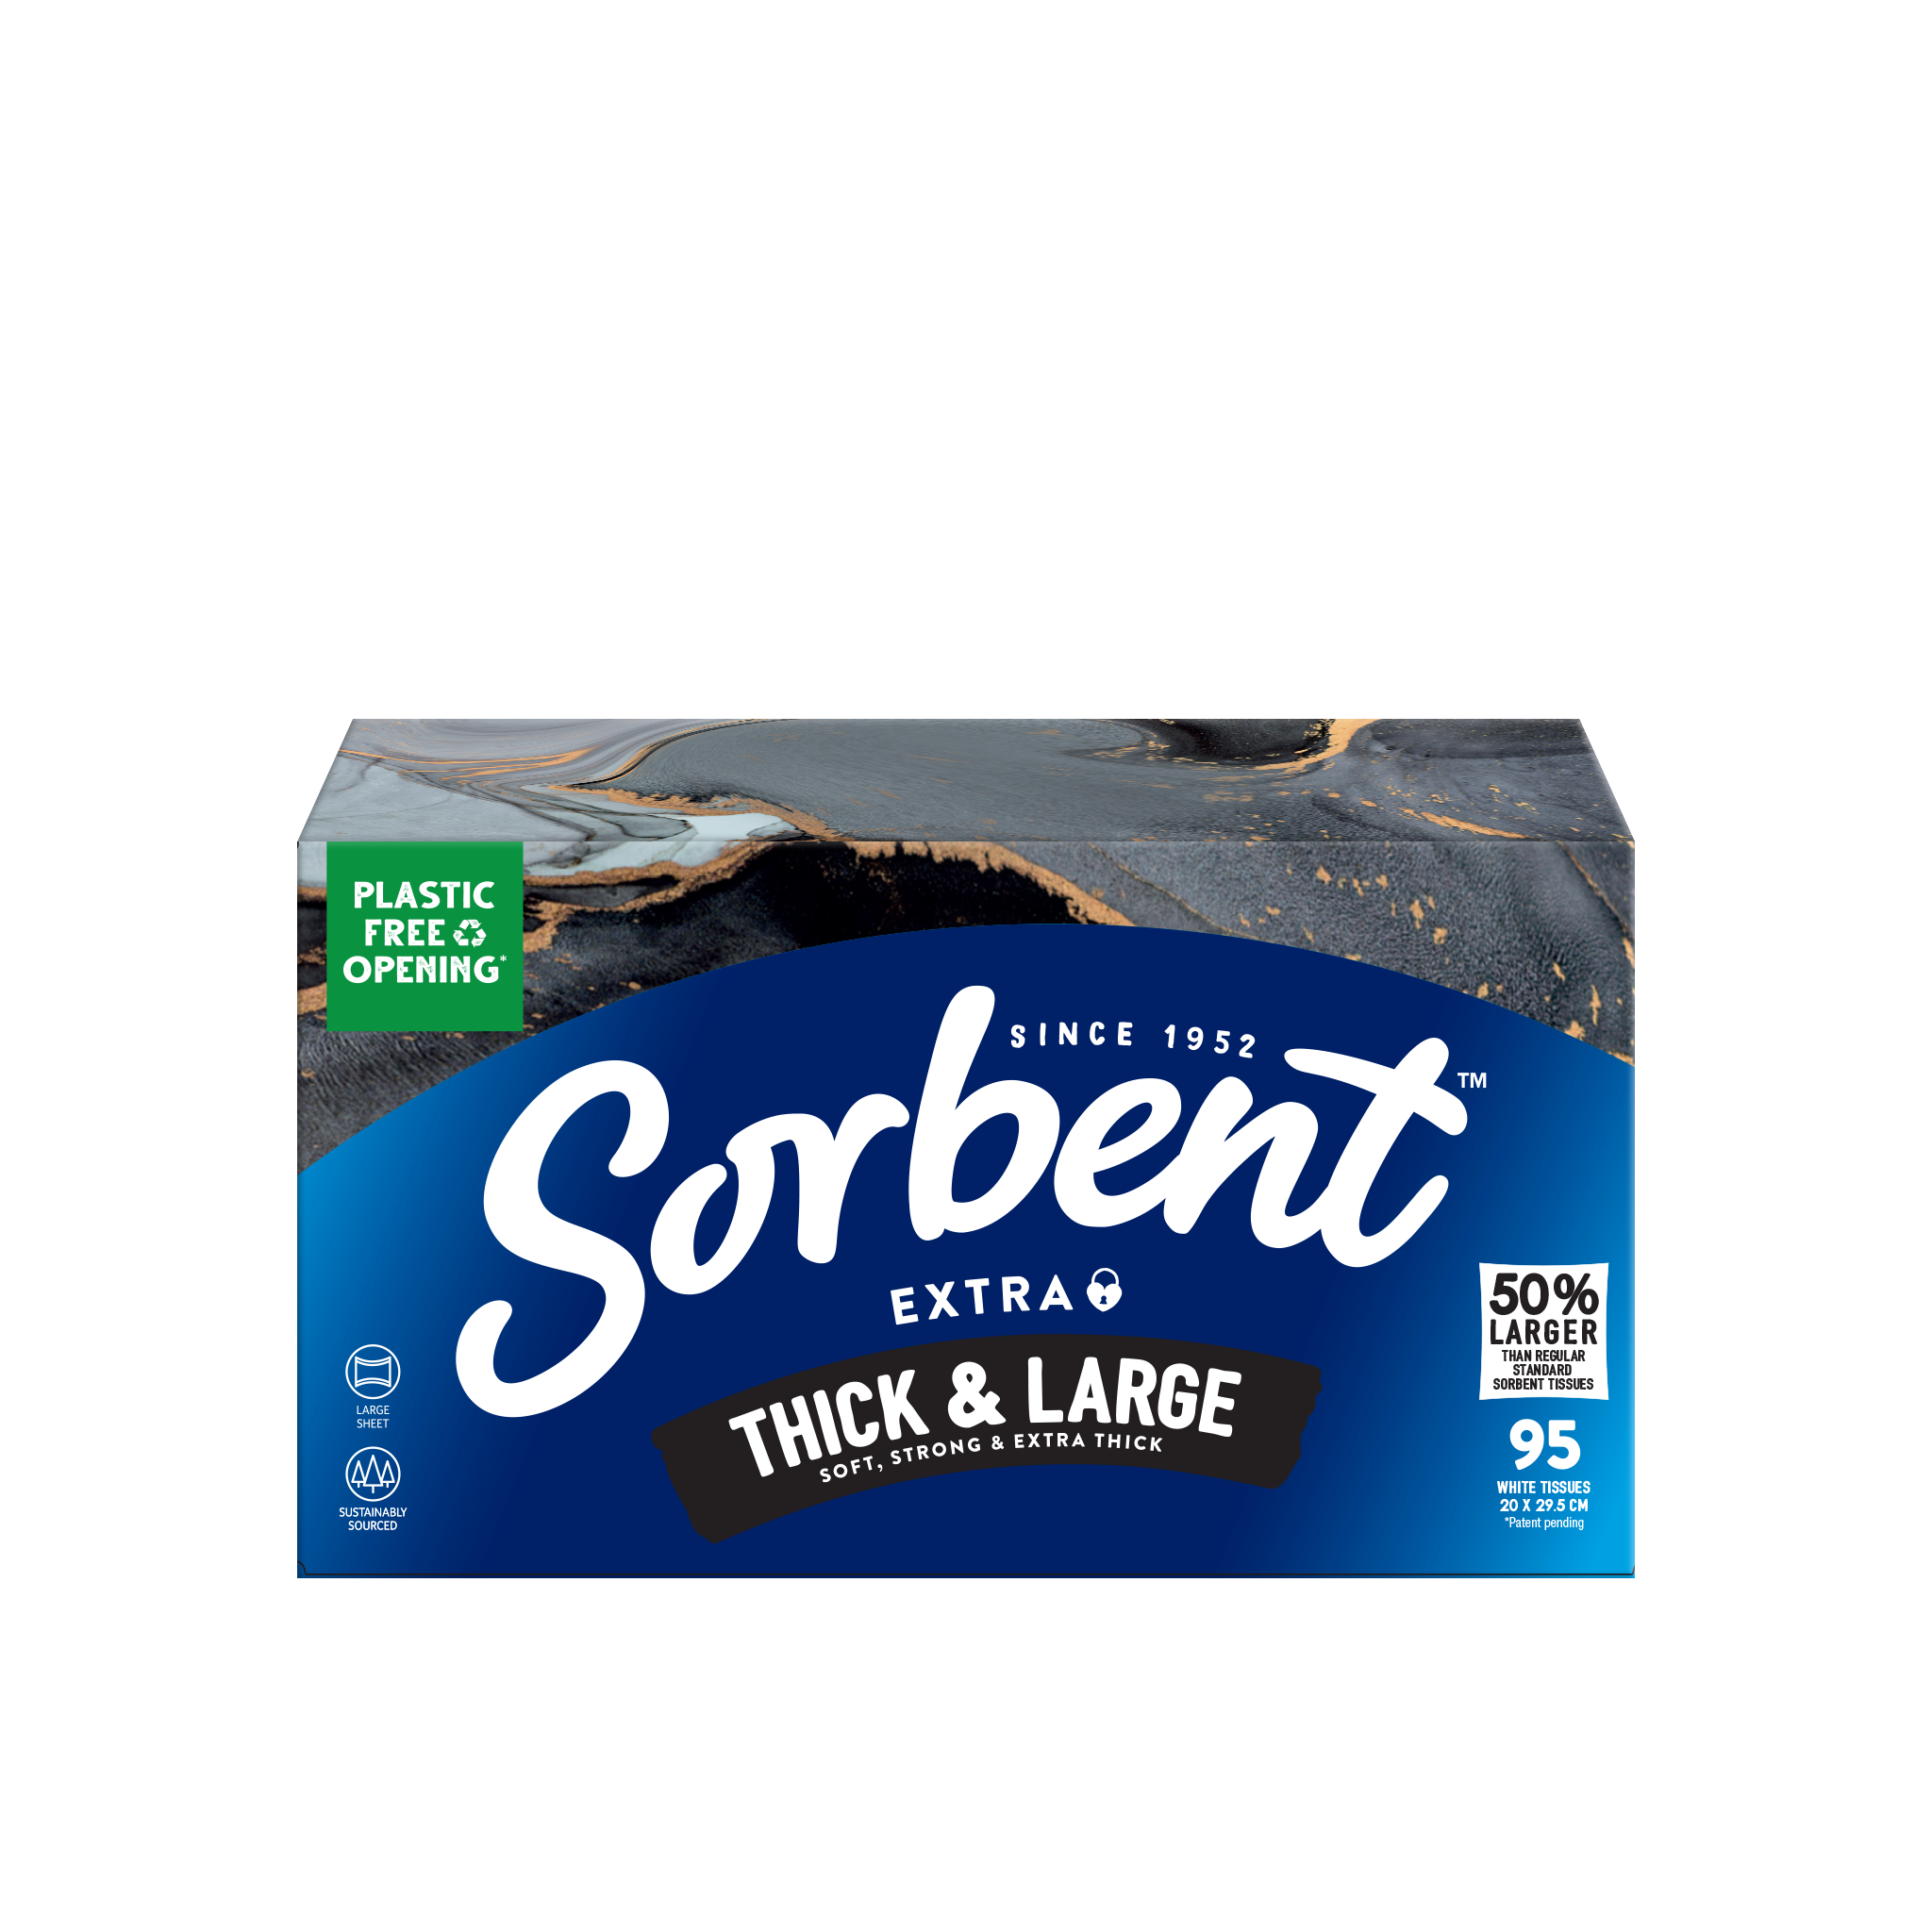 Sorbent Thick & Large Facial Tissues - 95 Pack